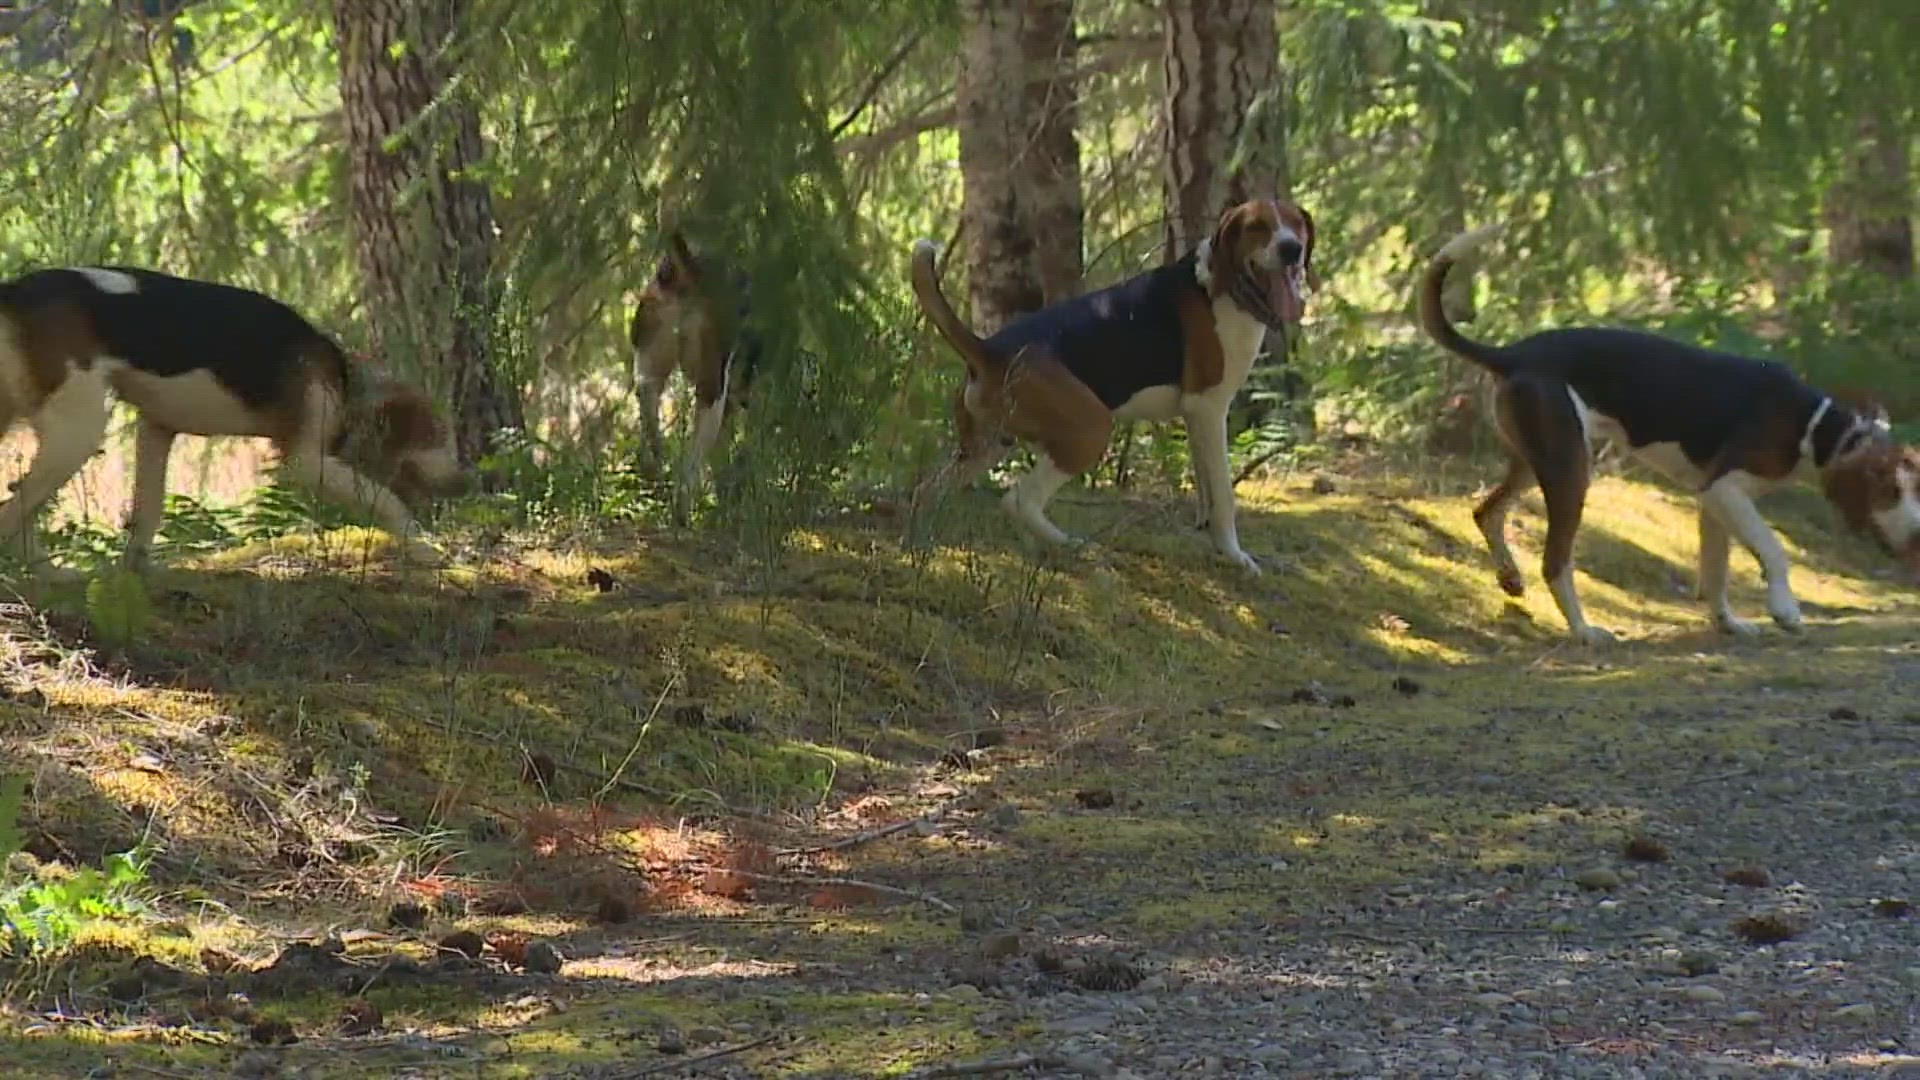 A dog who was attacked by a cougar is expected to be OK, officials said.